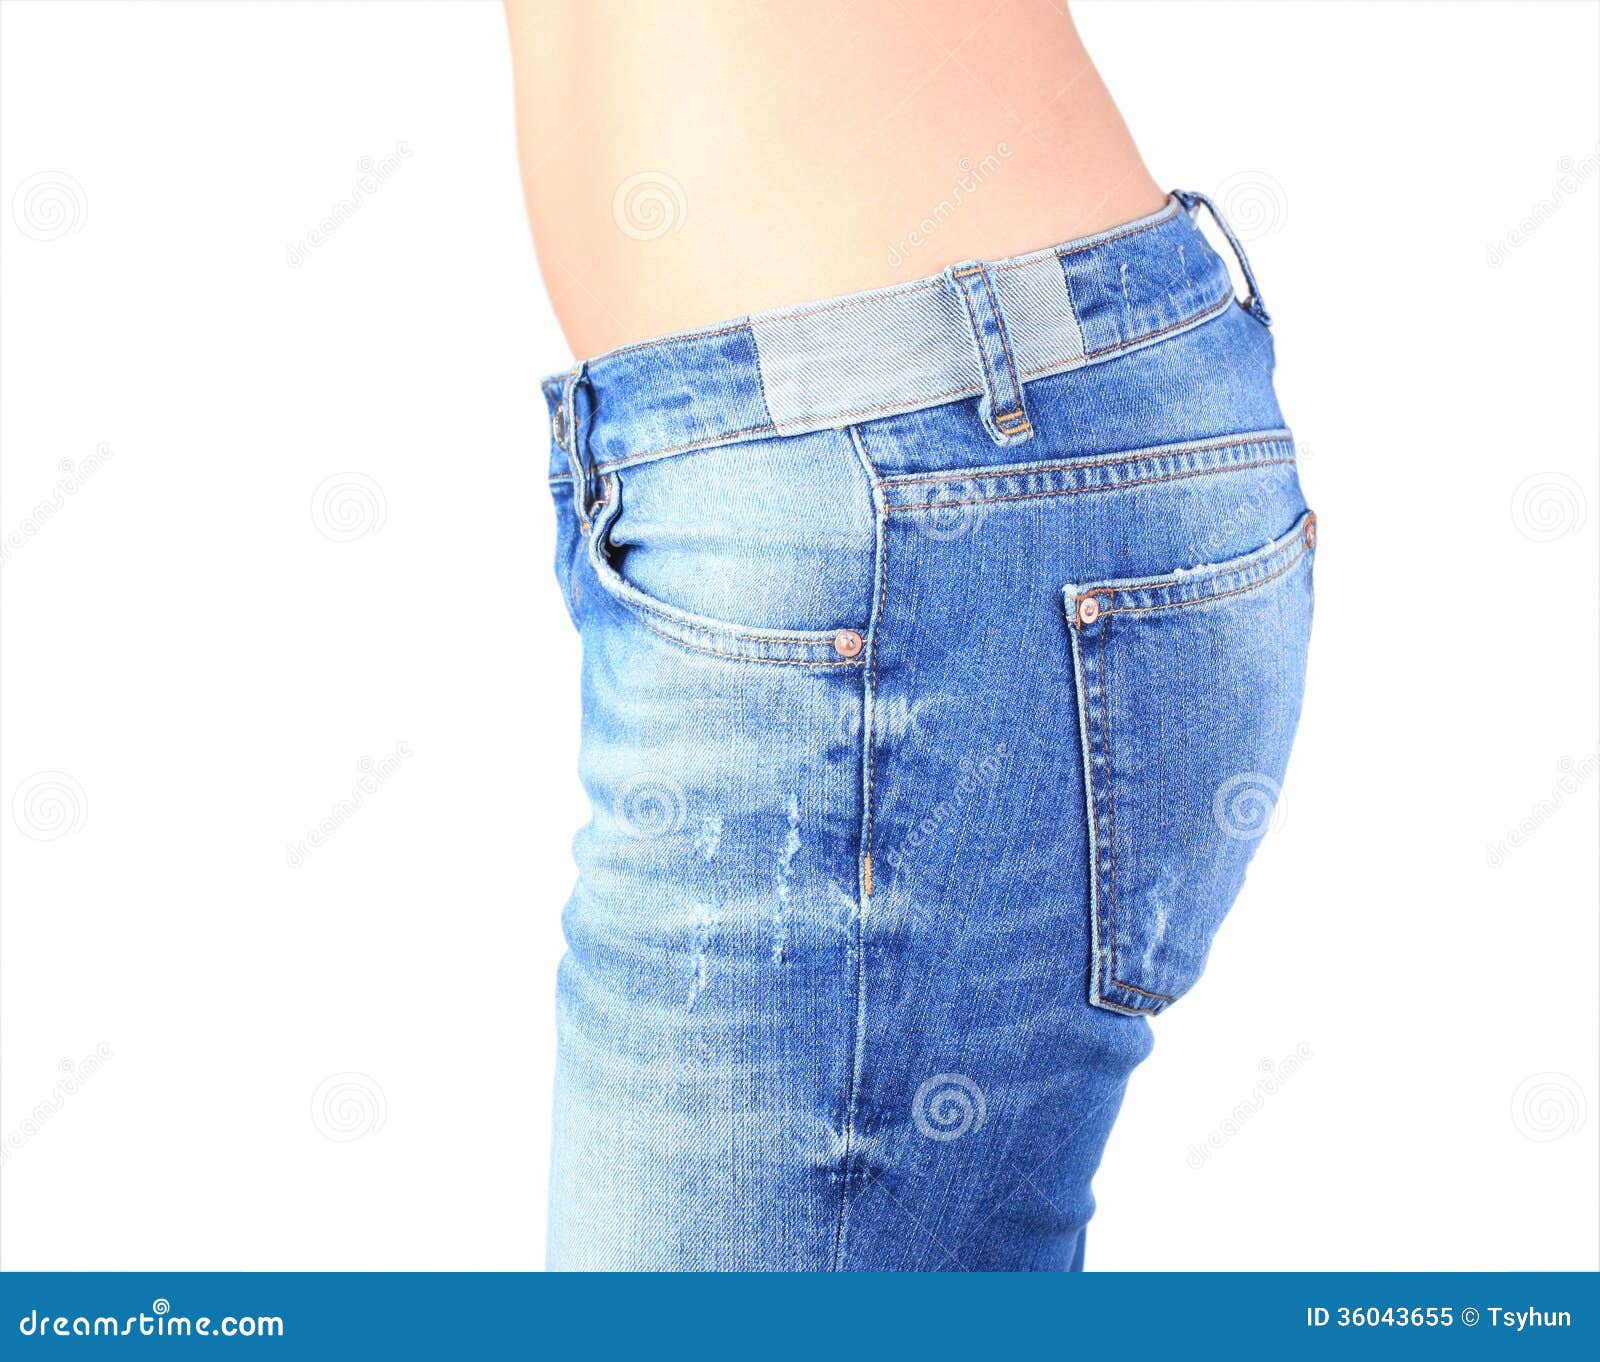 Woman jeans stock image. Image of bare, stomach, casual - 36043655